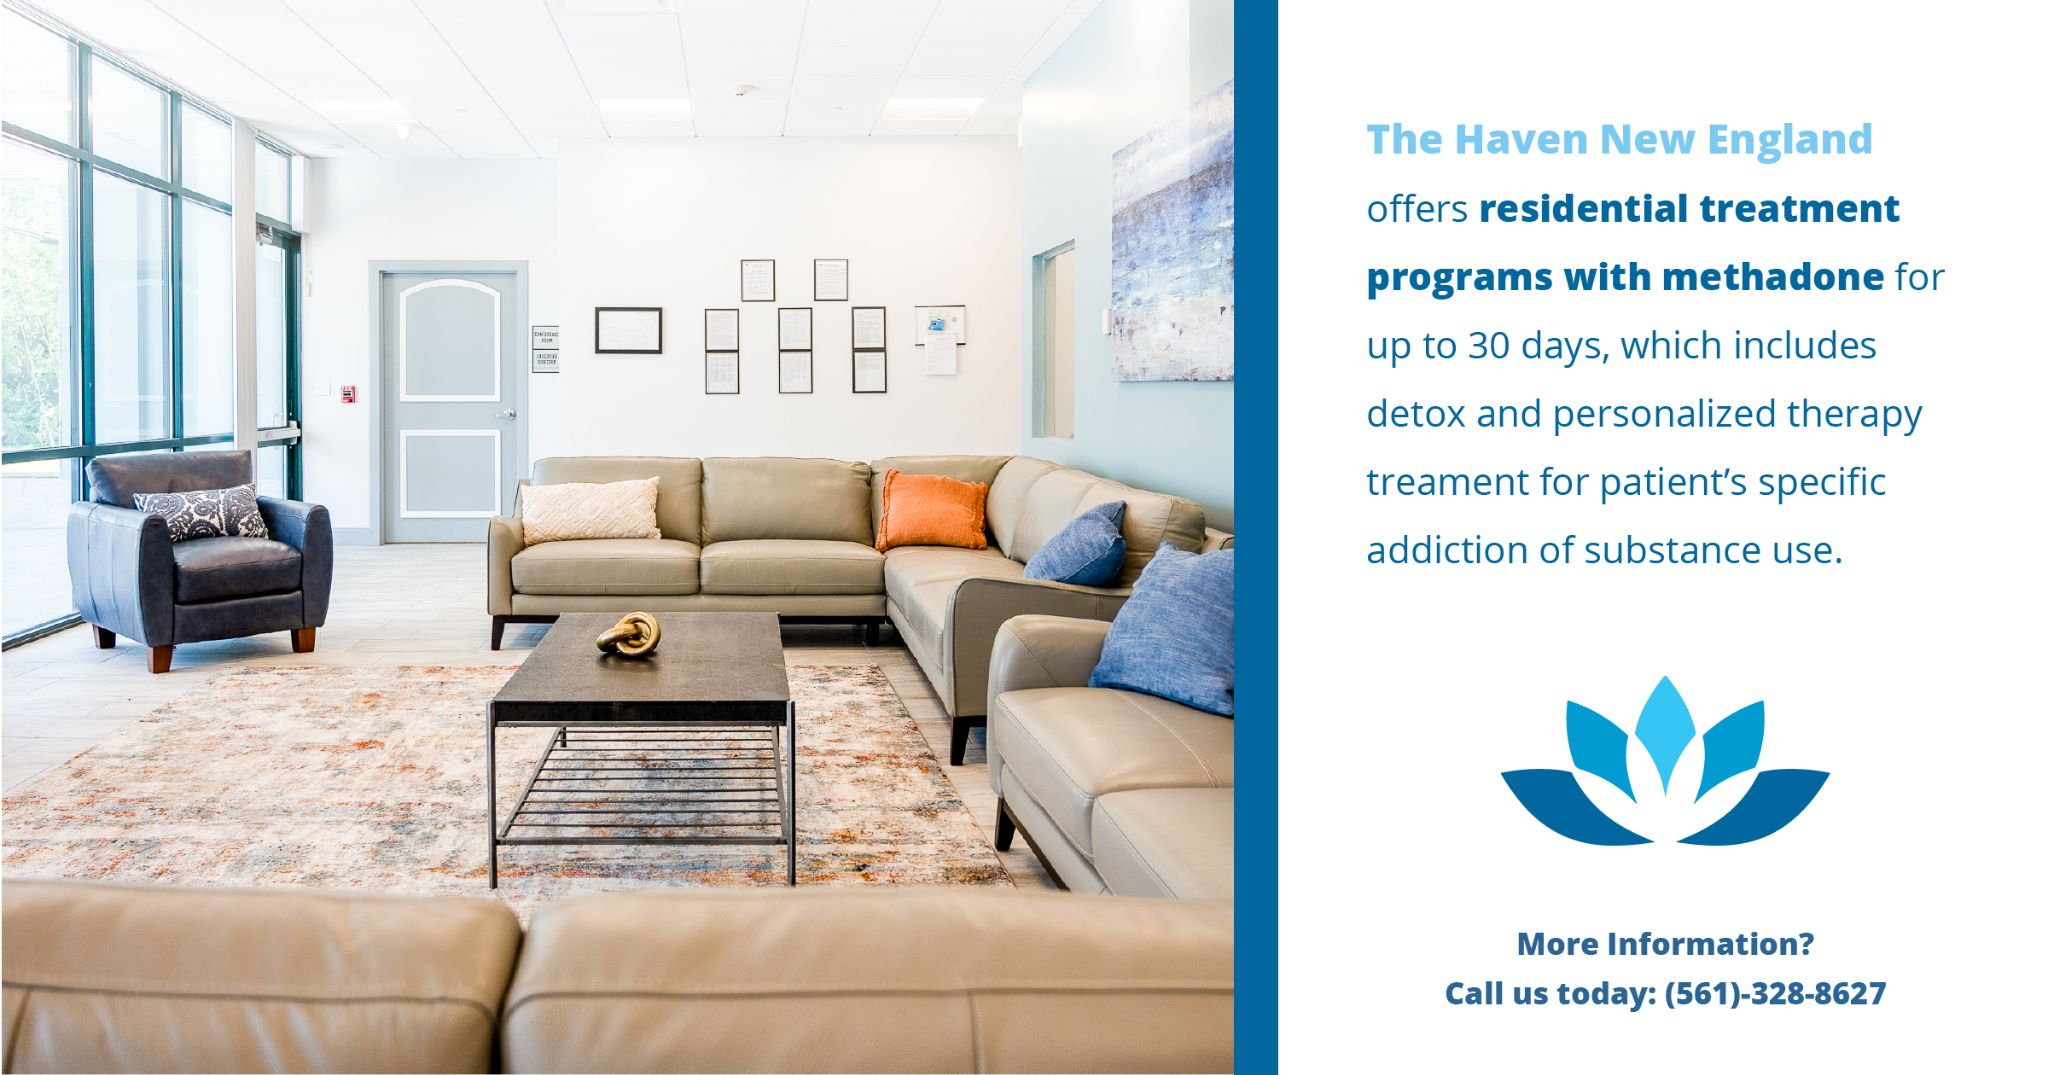 The haven new england offers residential treatment programs with methadone for up to 30 days 